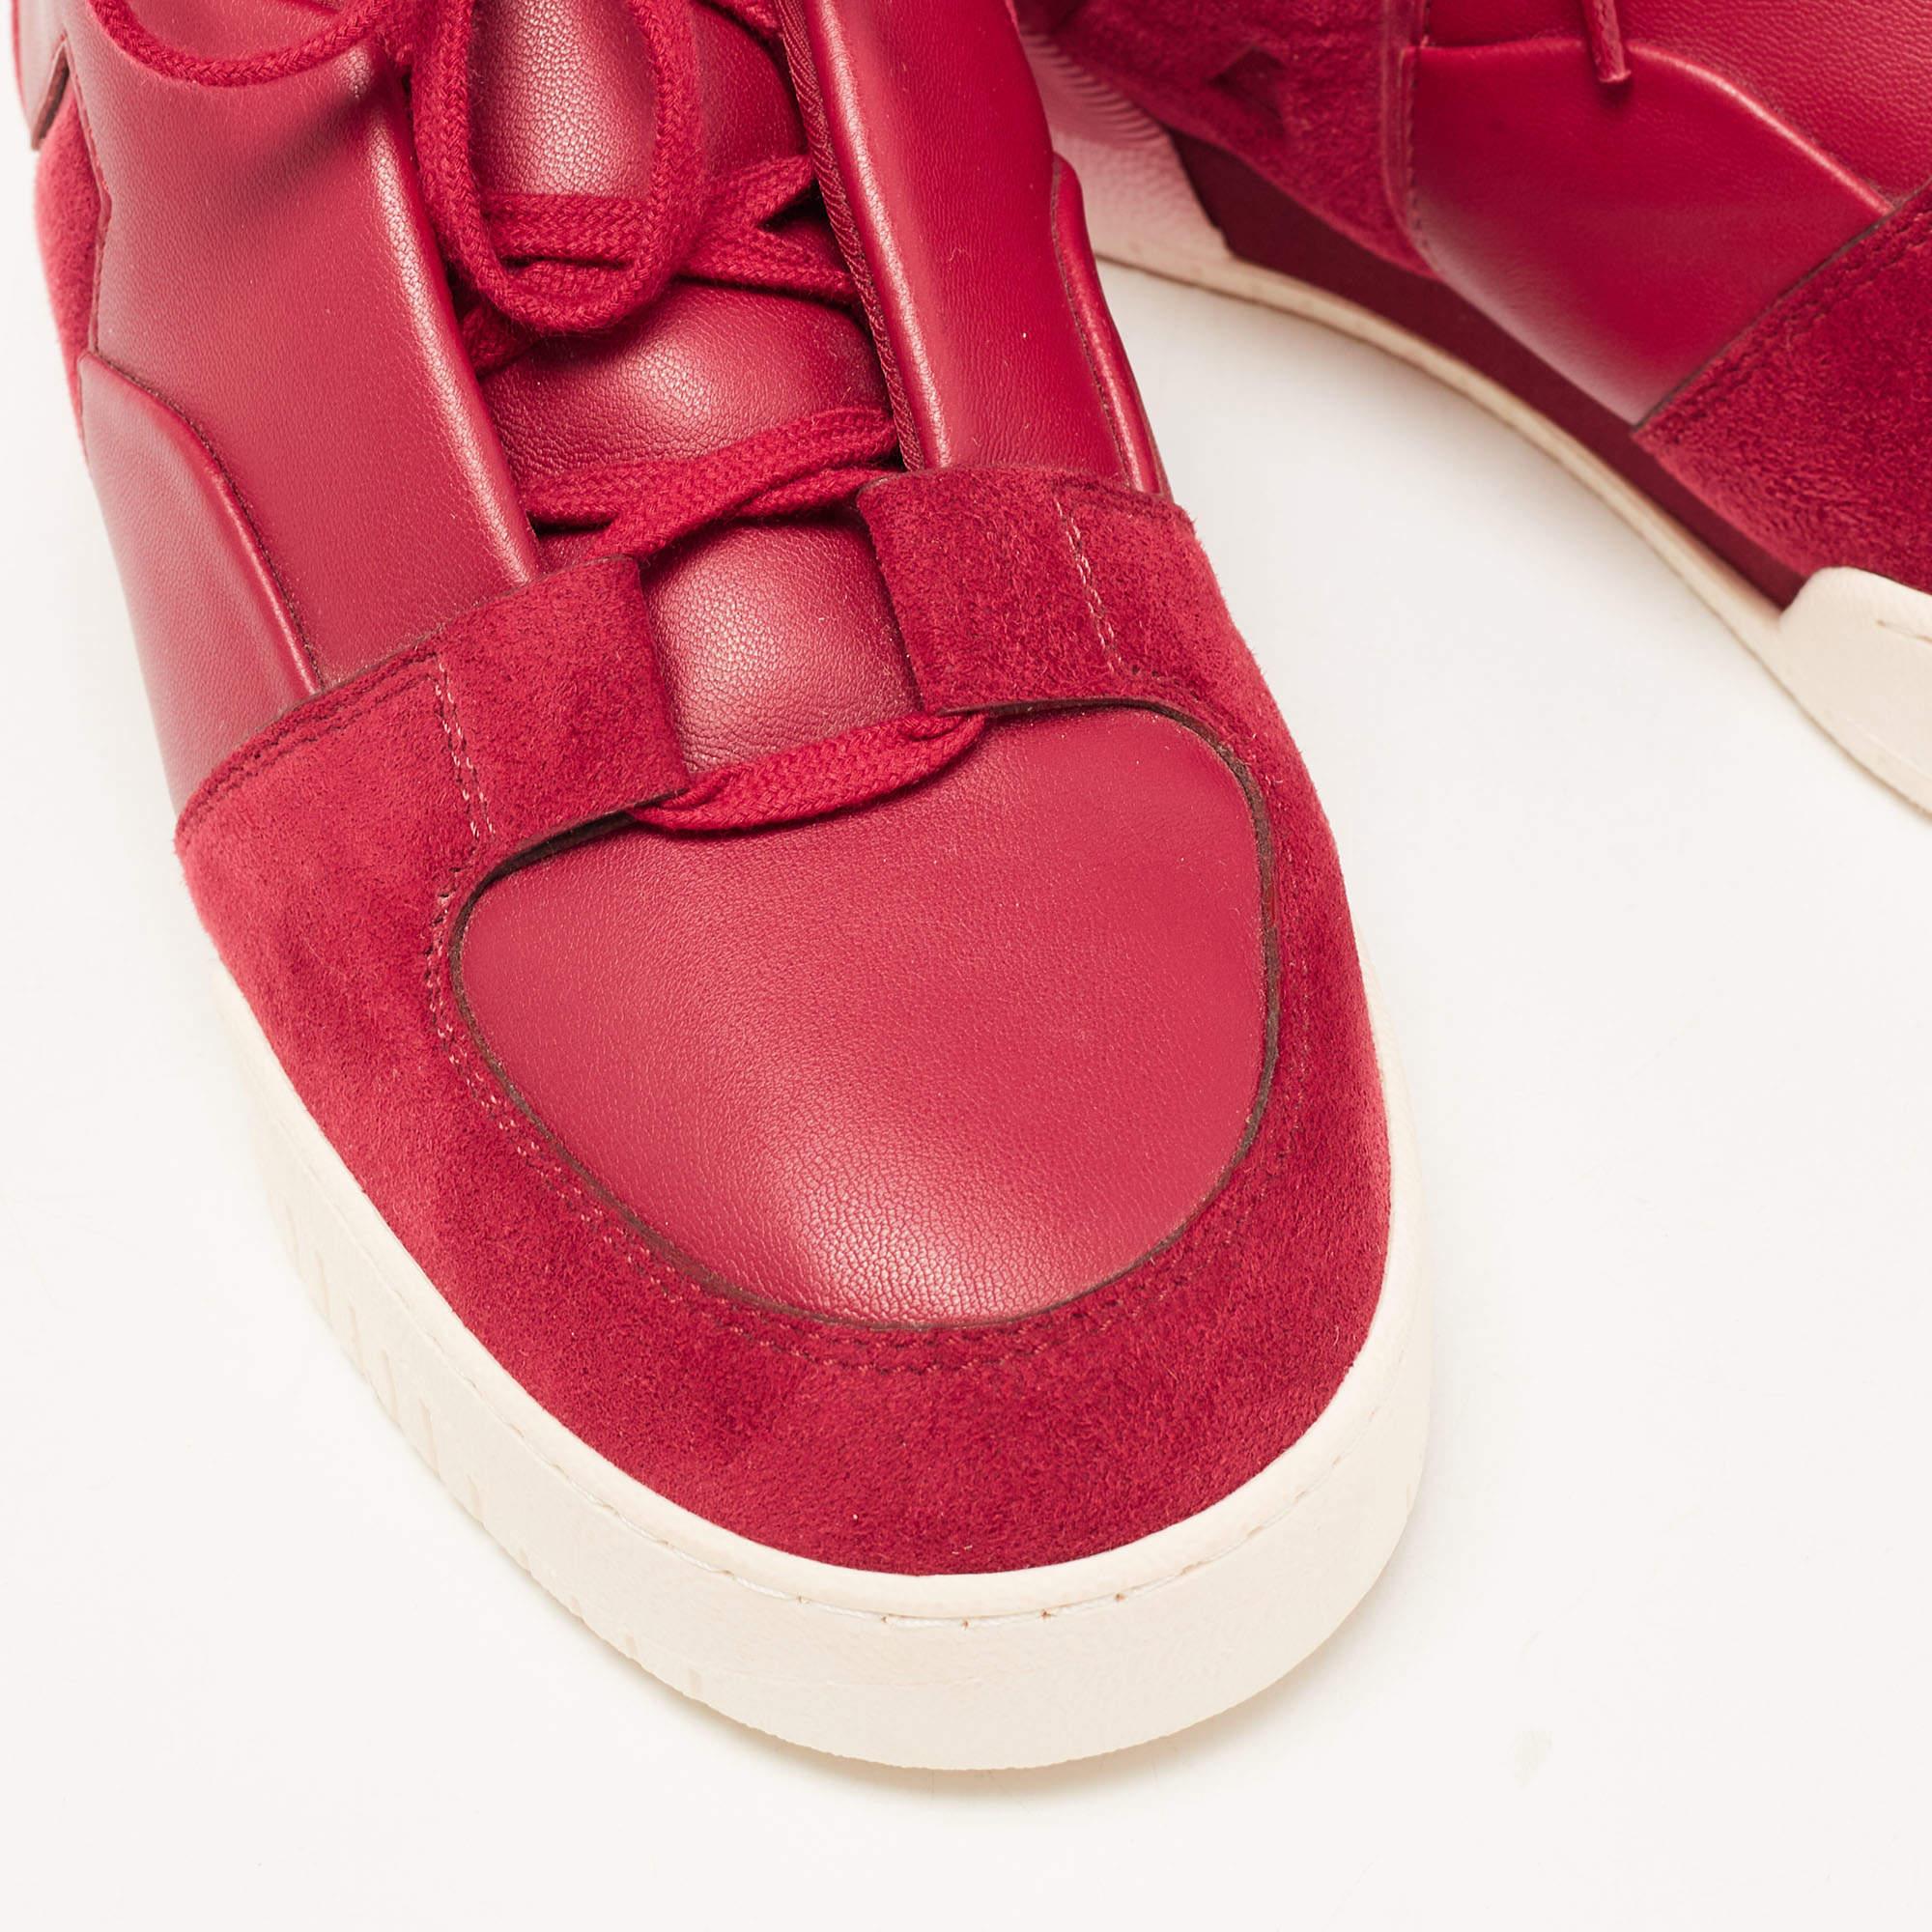 Stella McCartney Red Faux Leather and Faux Suede High Top Sneakers Size 37 6